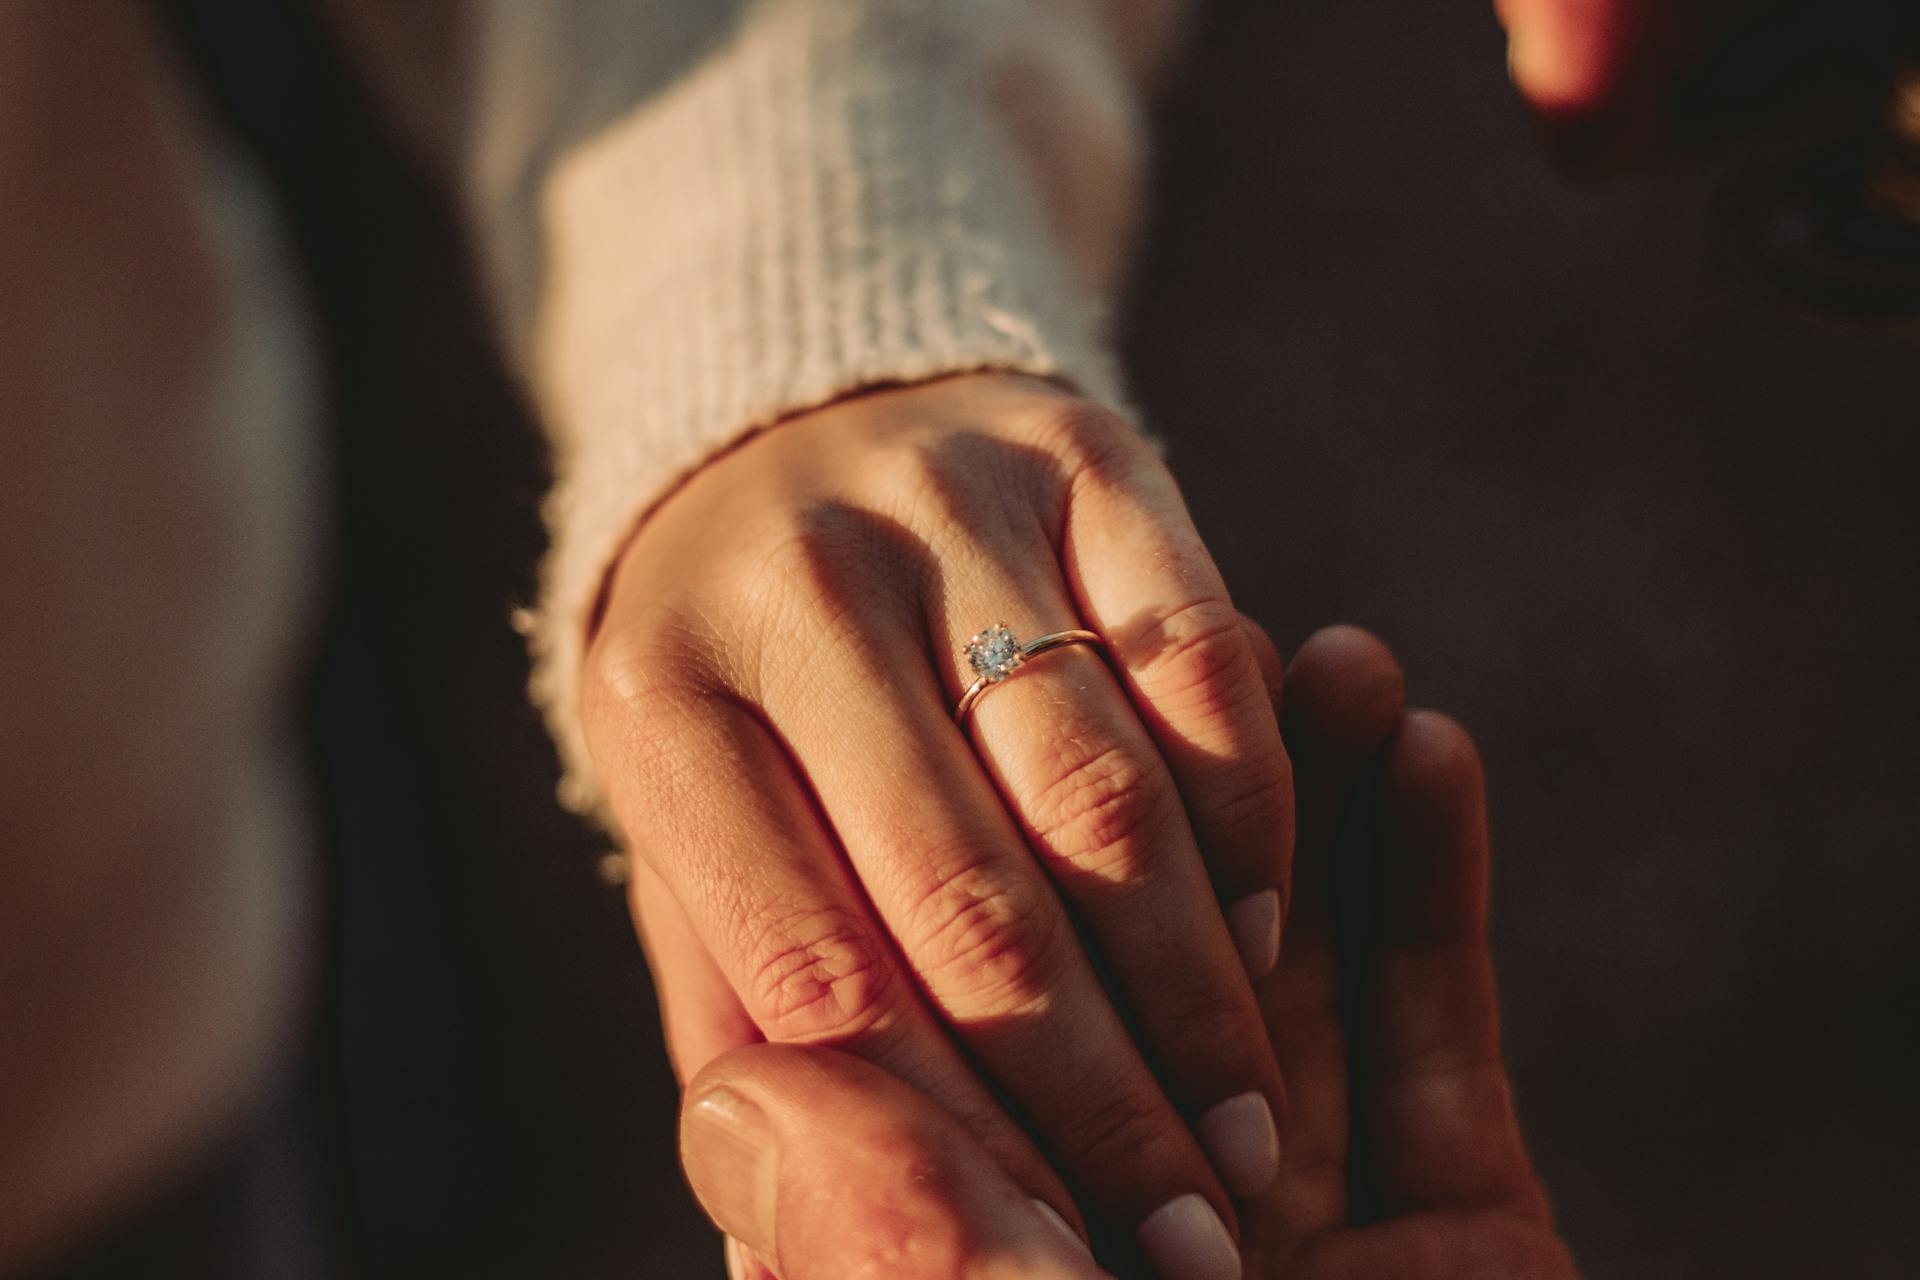 A man holding a woman's hand | Source: Pexels